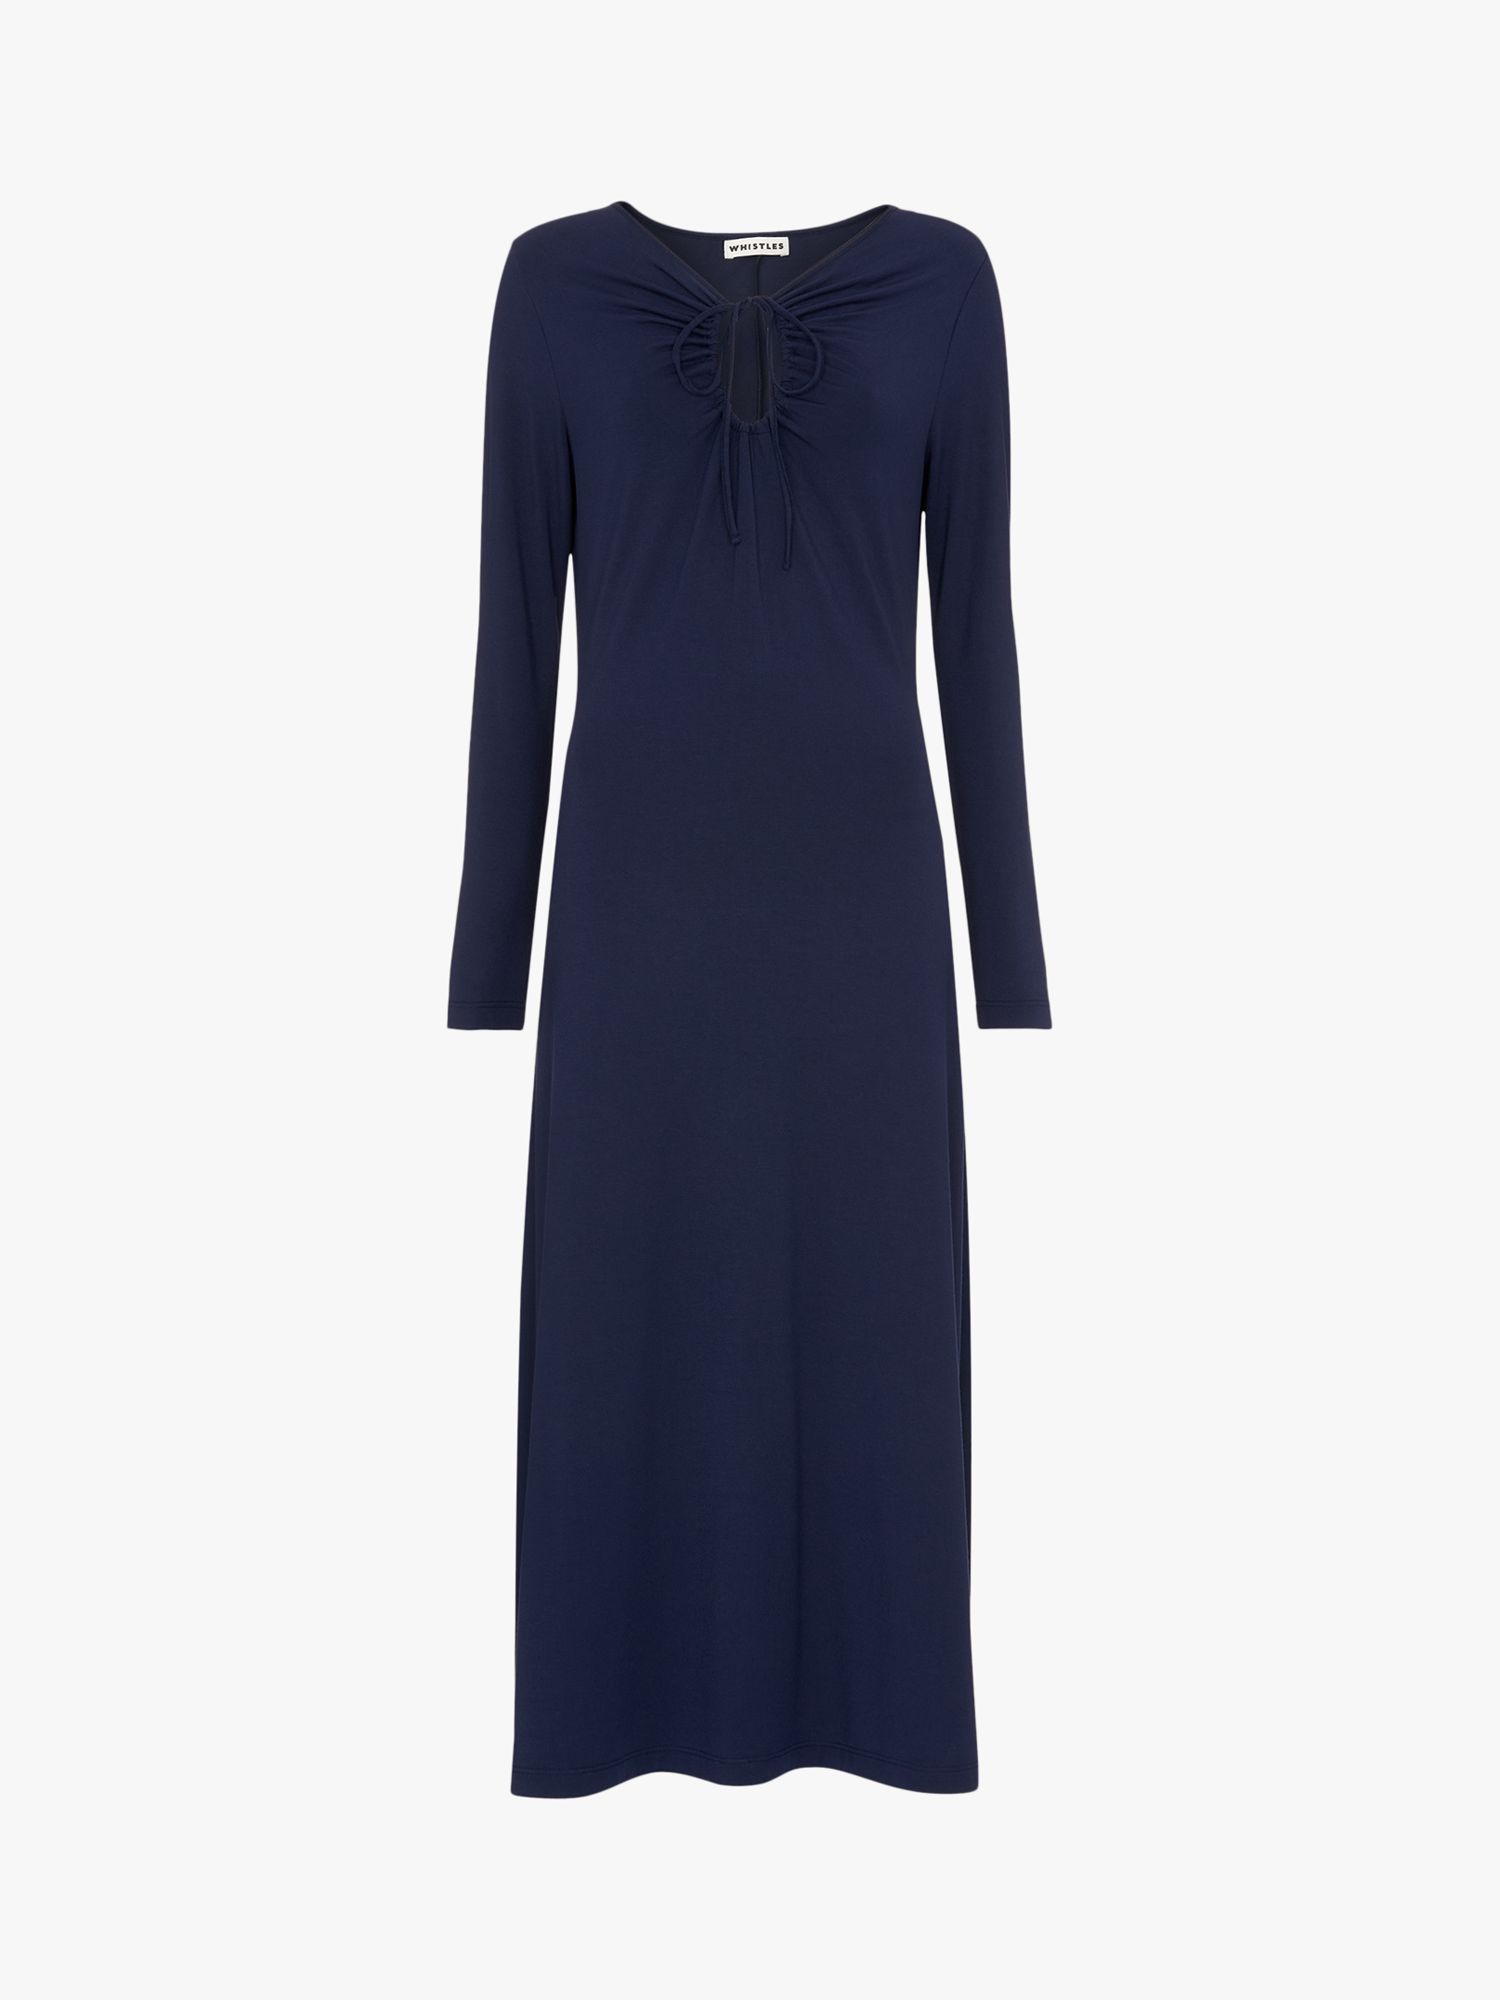 Whistles Keyhole Cut Out Jersey Midi Dress, Navy